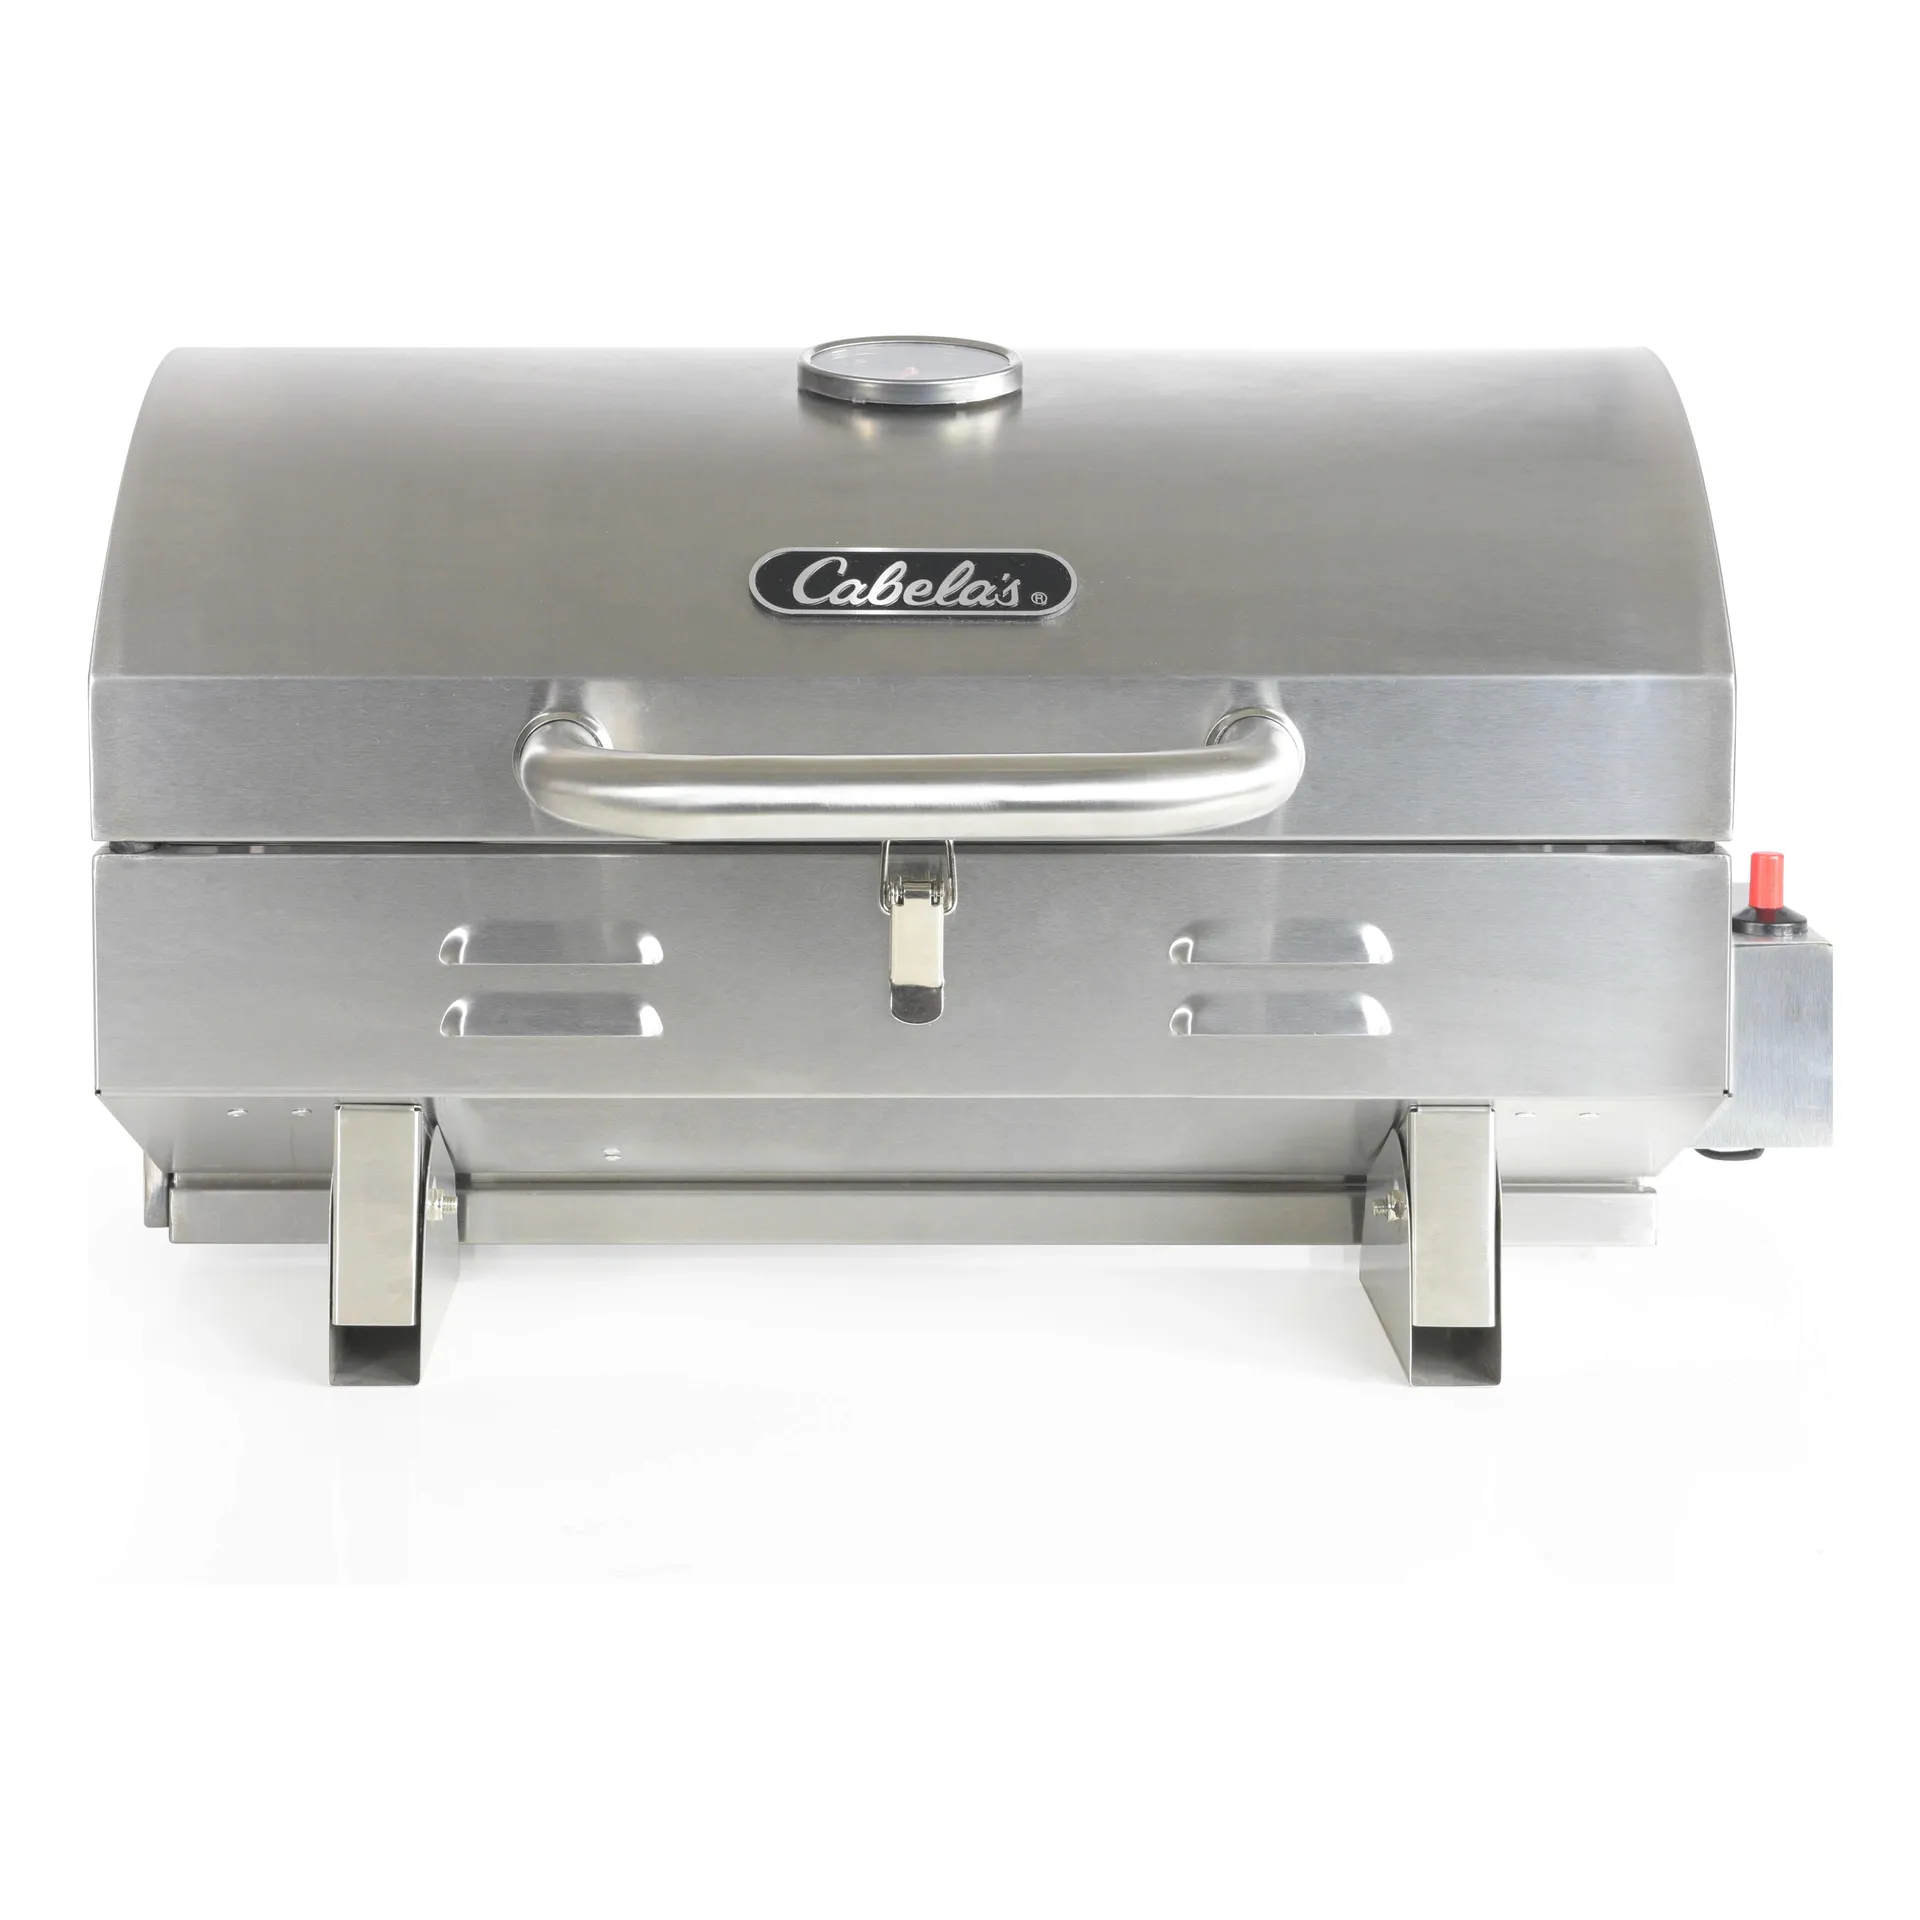 Cabela’s® Stainless Steel Tabletop Grill